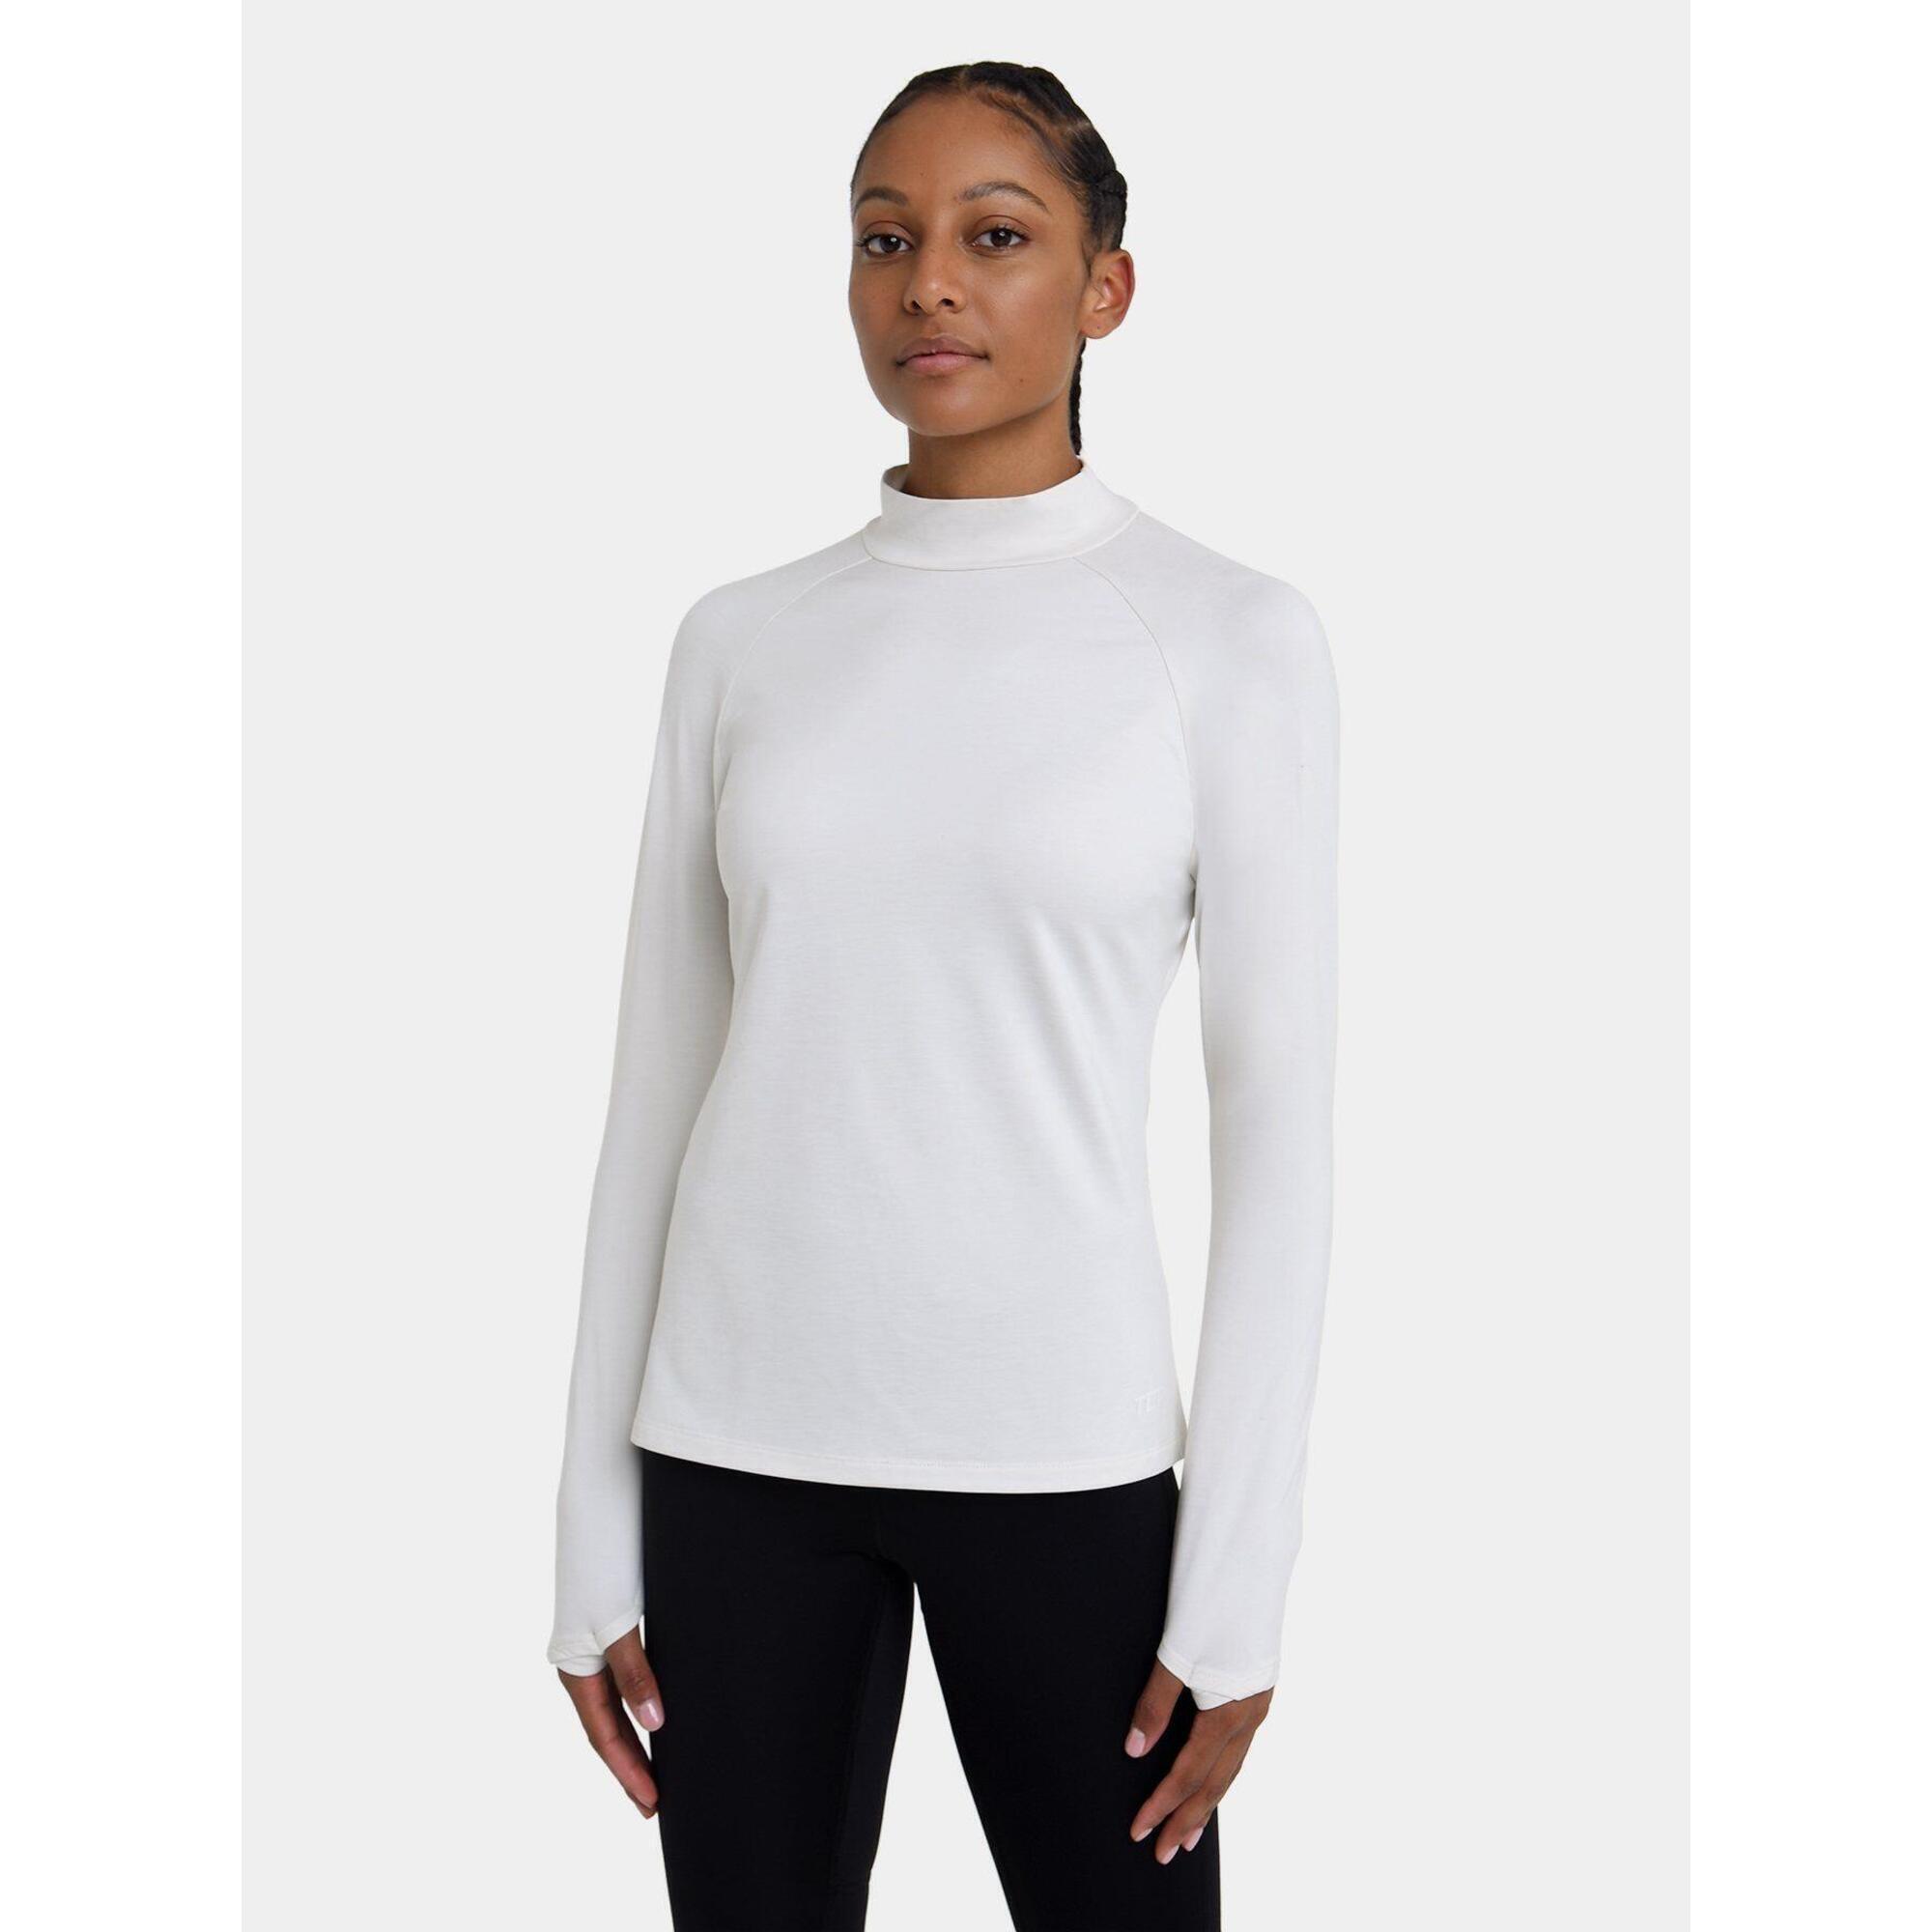 TCA Women's Super Thermal Base Layer Top - Mock Neck - Marshmallow